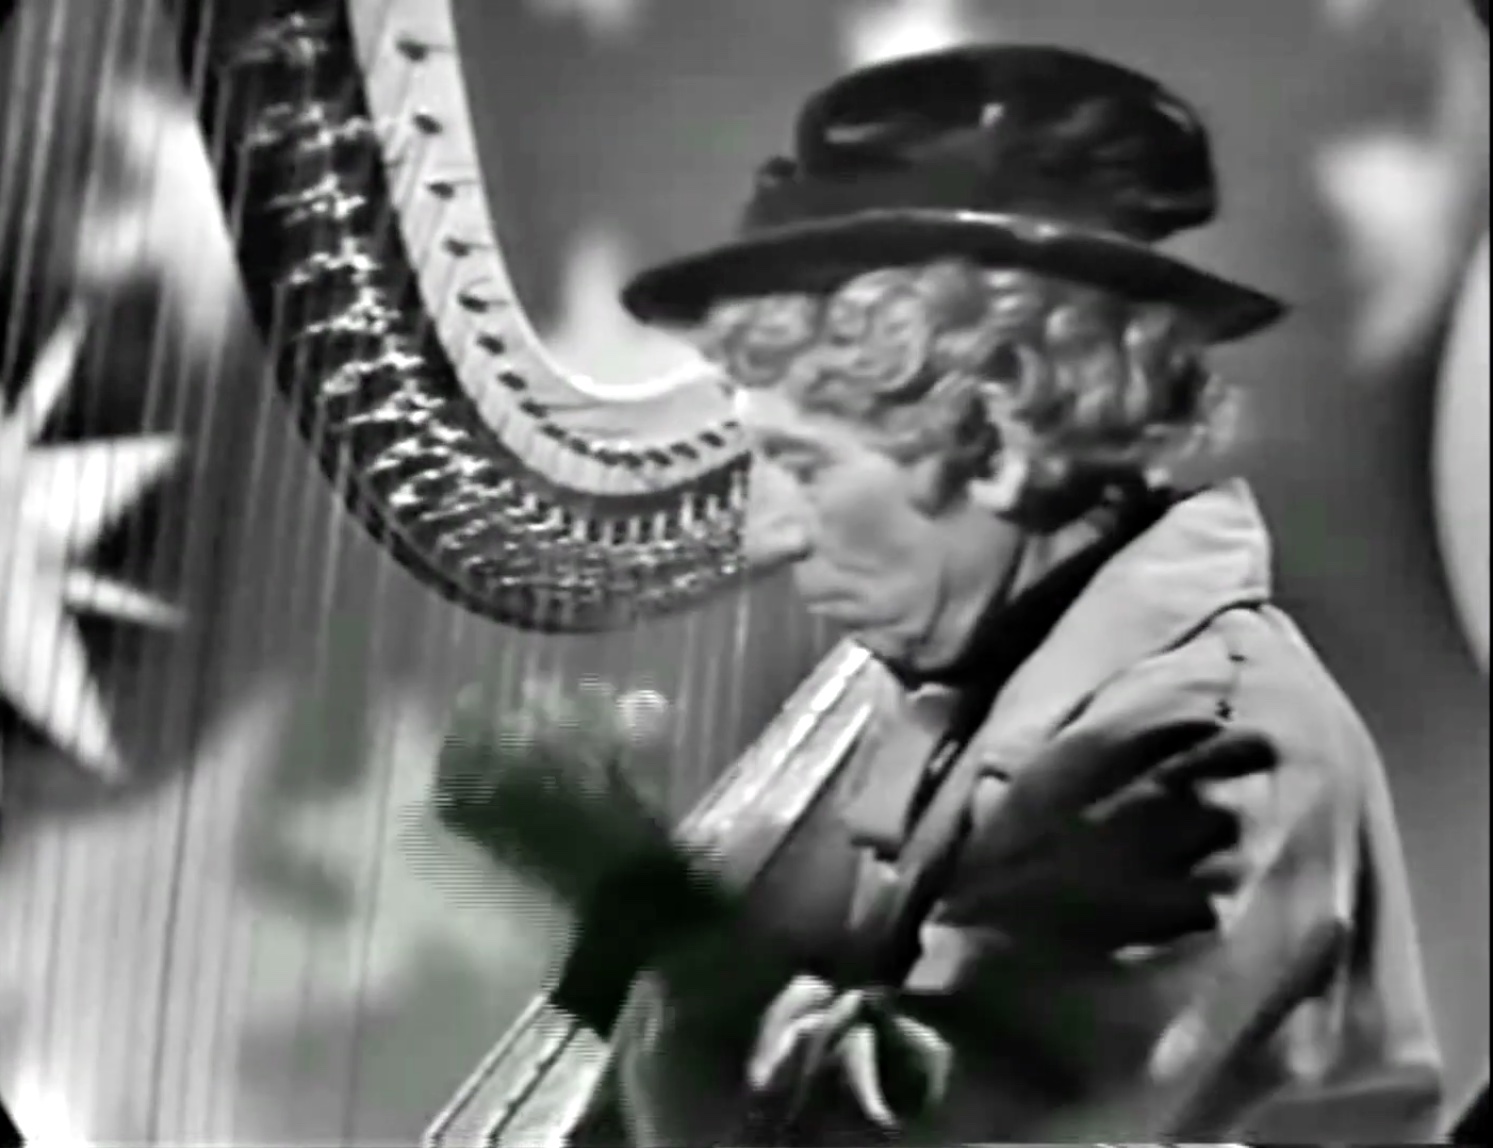 Harpo Marx playing his own composition, "Guardian Angel", on The Red Skelton Hour - "Somebody Up There Should Stay Up There"